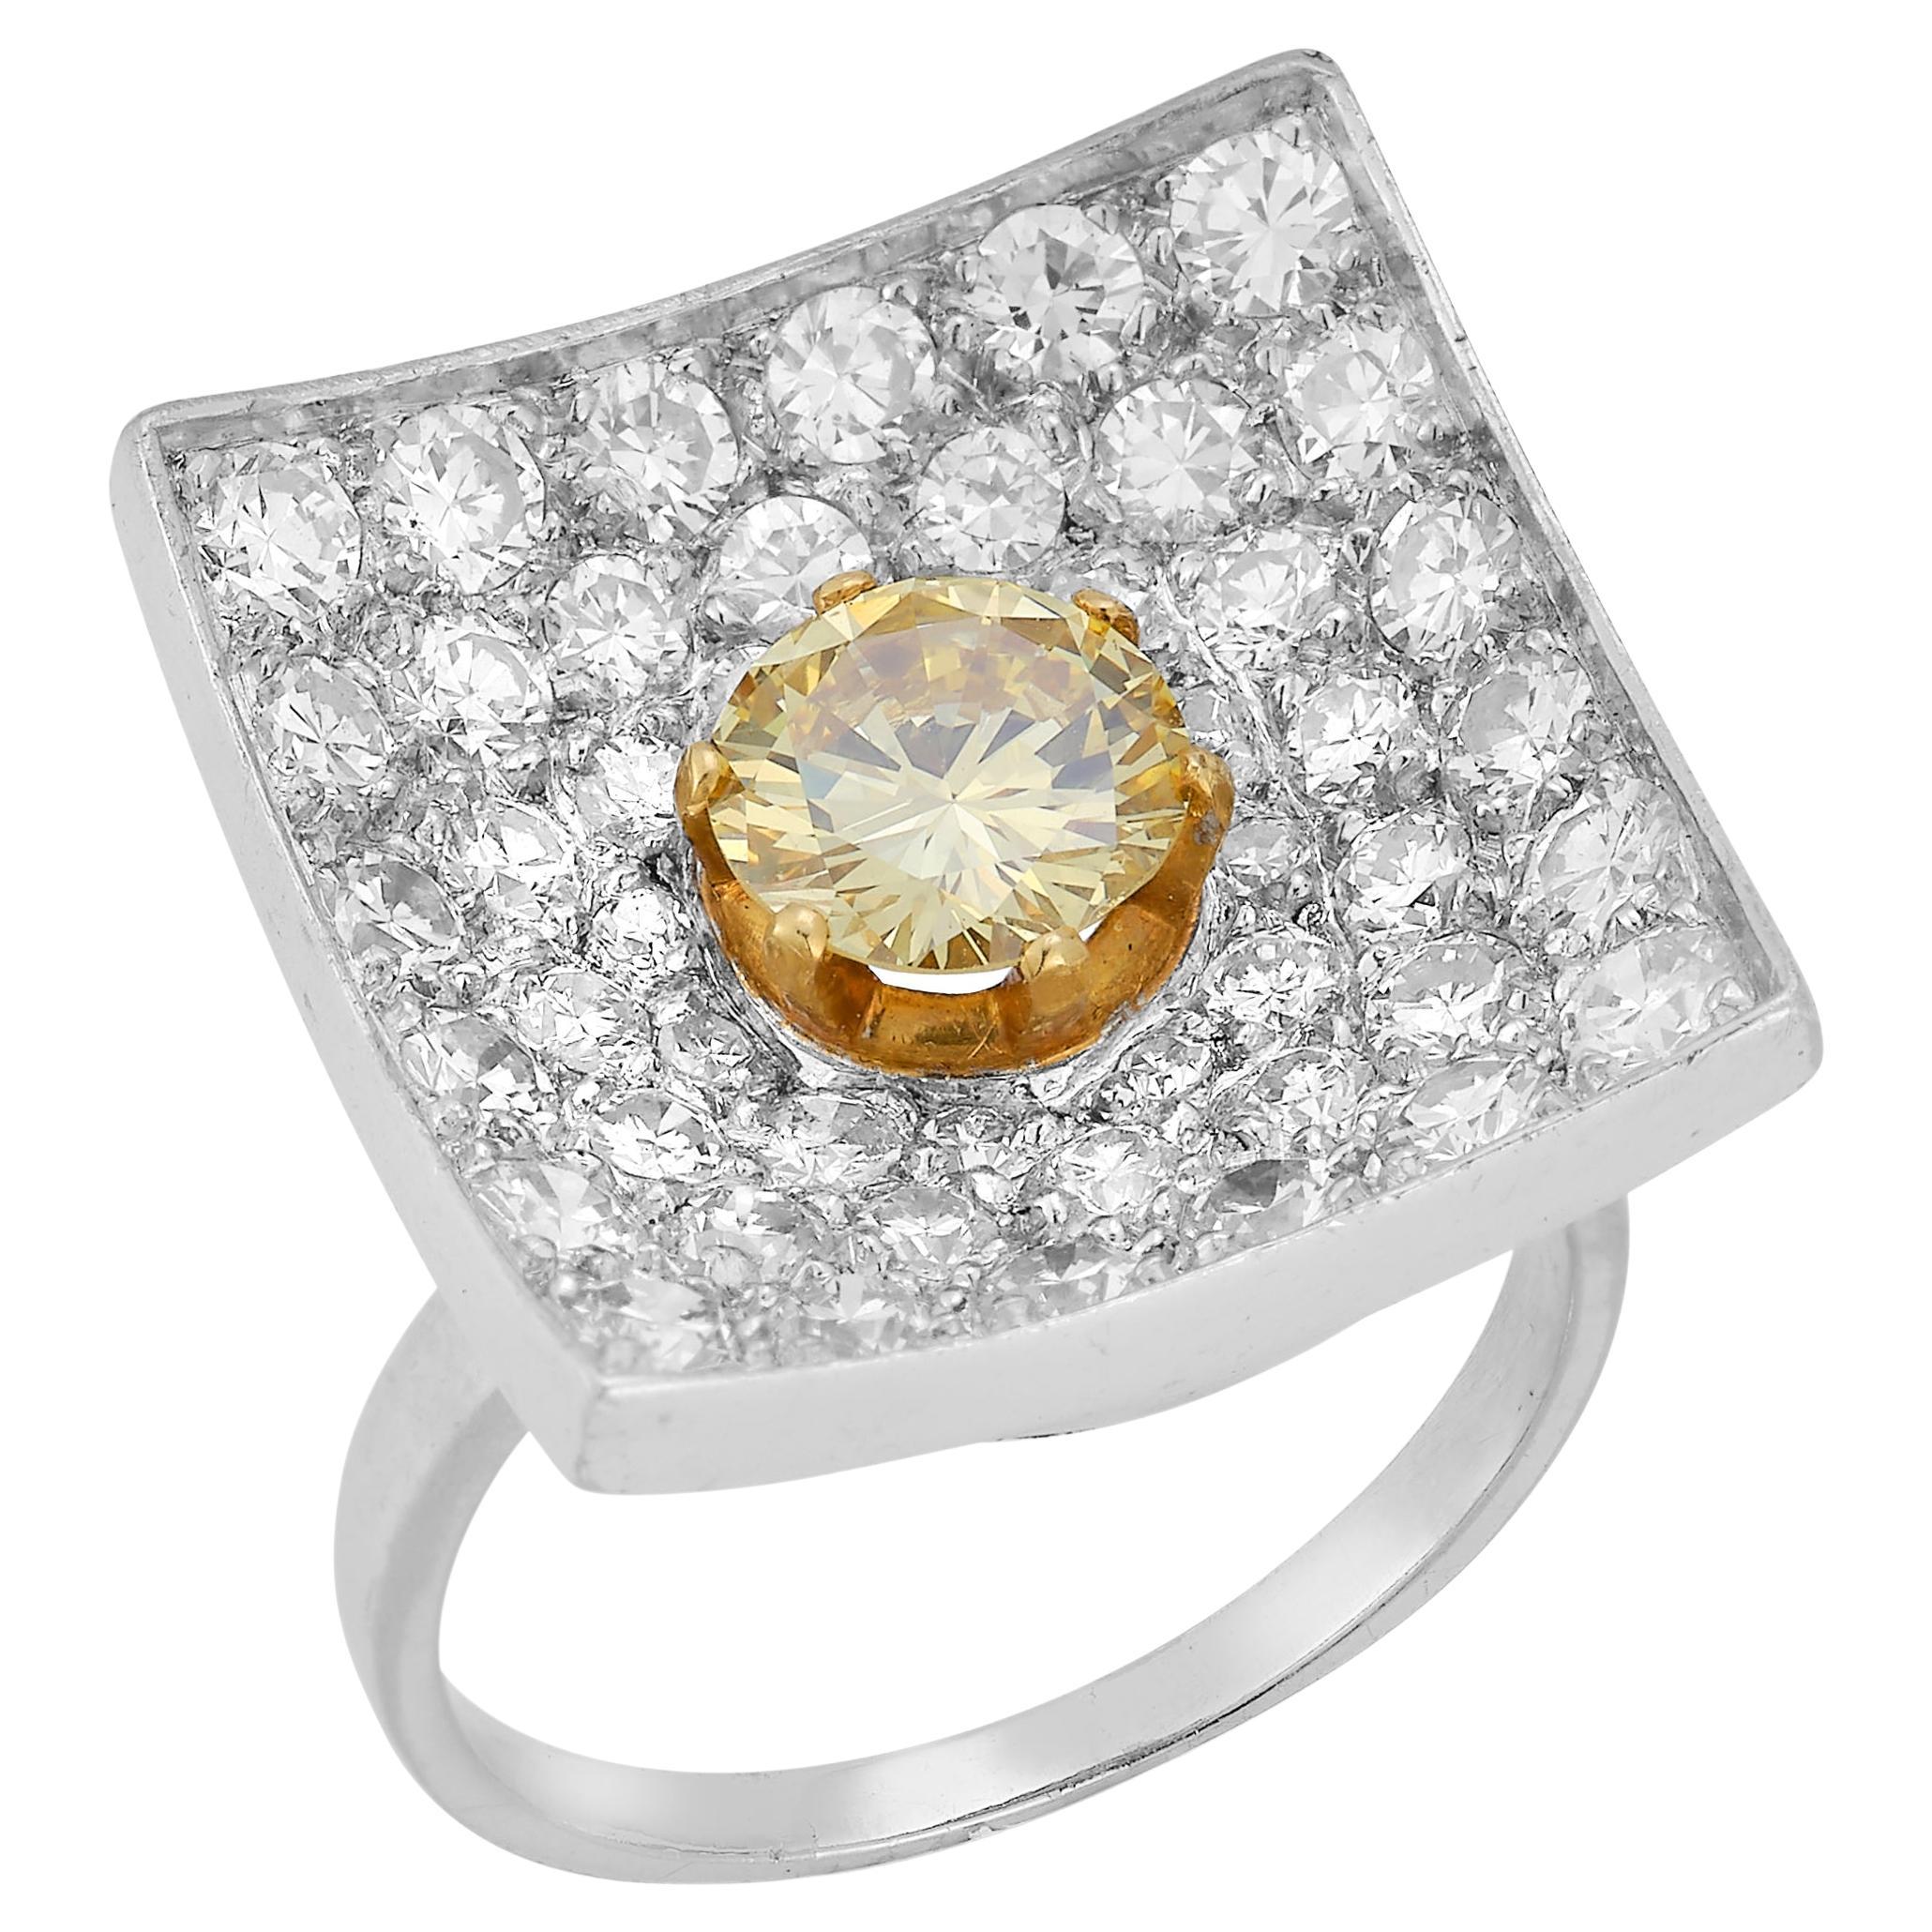 Modernist Square Shapes Yellow Diamond Ring